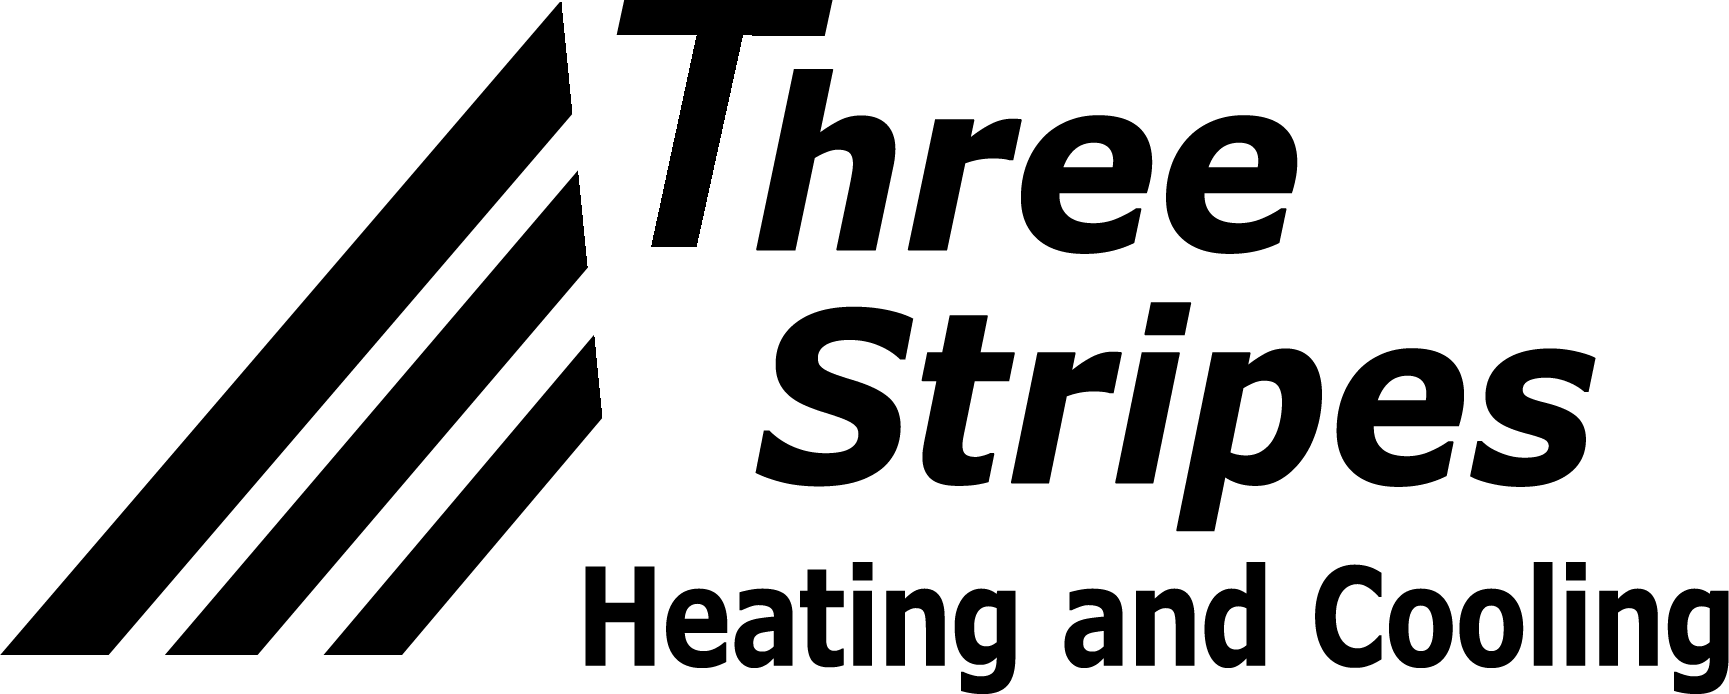 Air Conditioning Repair Service Dearborn MI | Three Stripes Heating and Cooling, Inc.